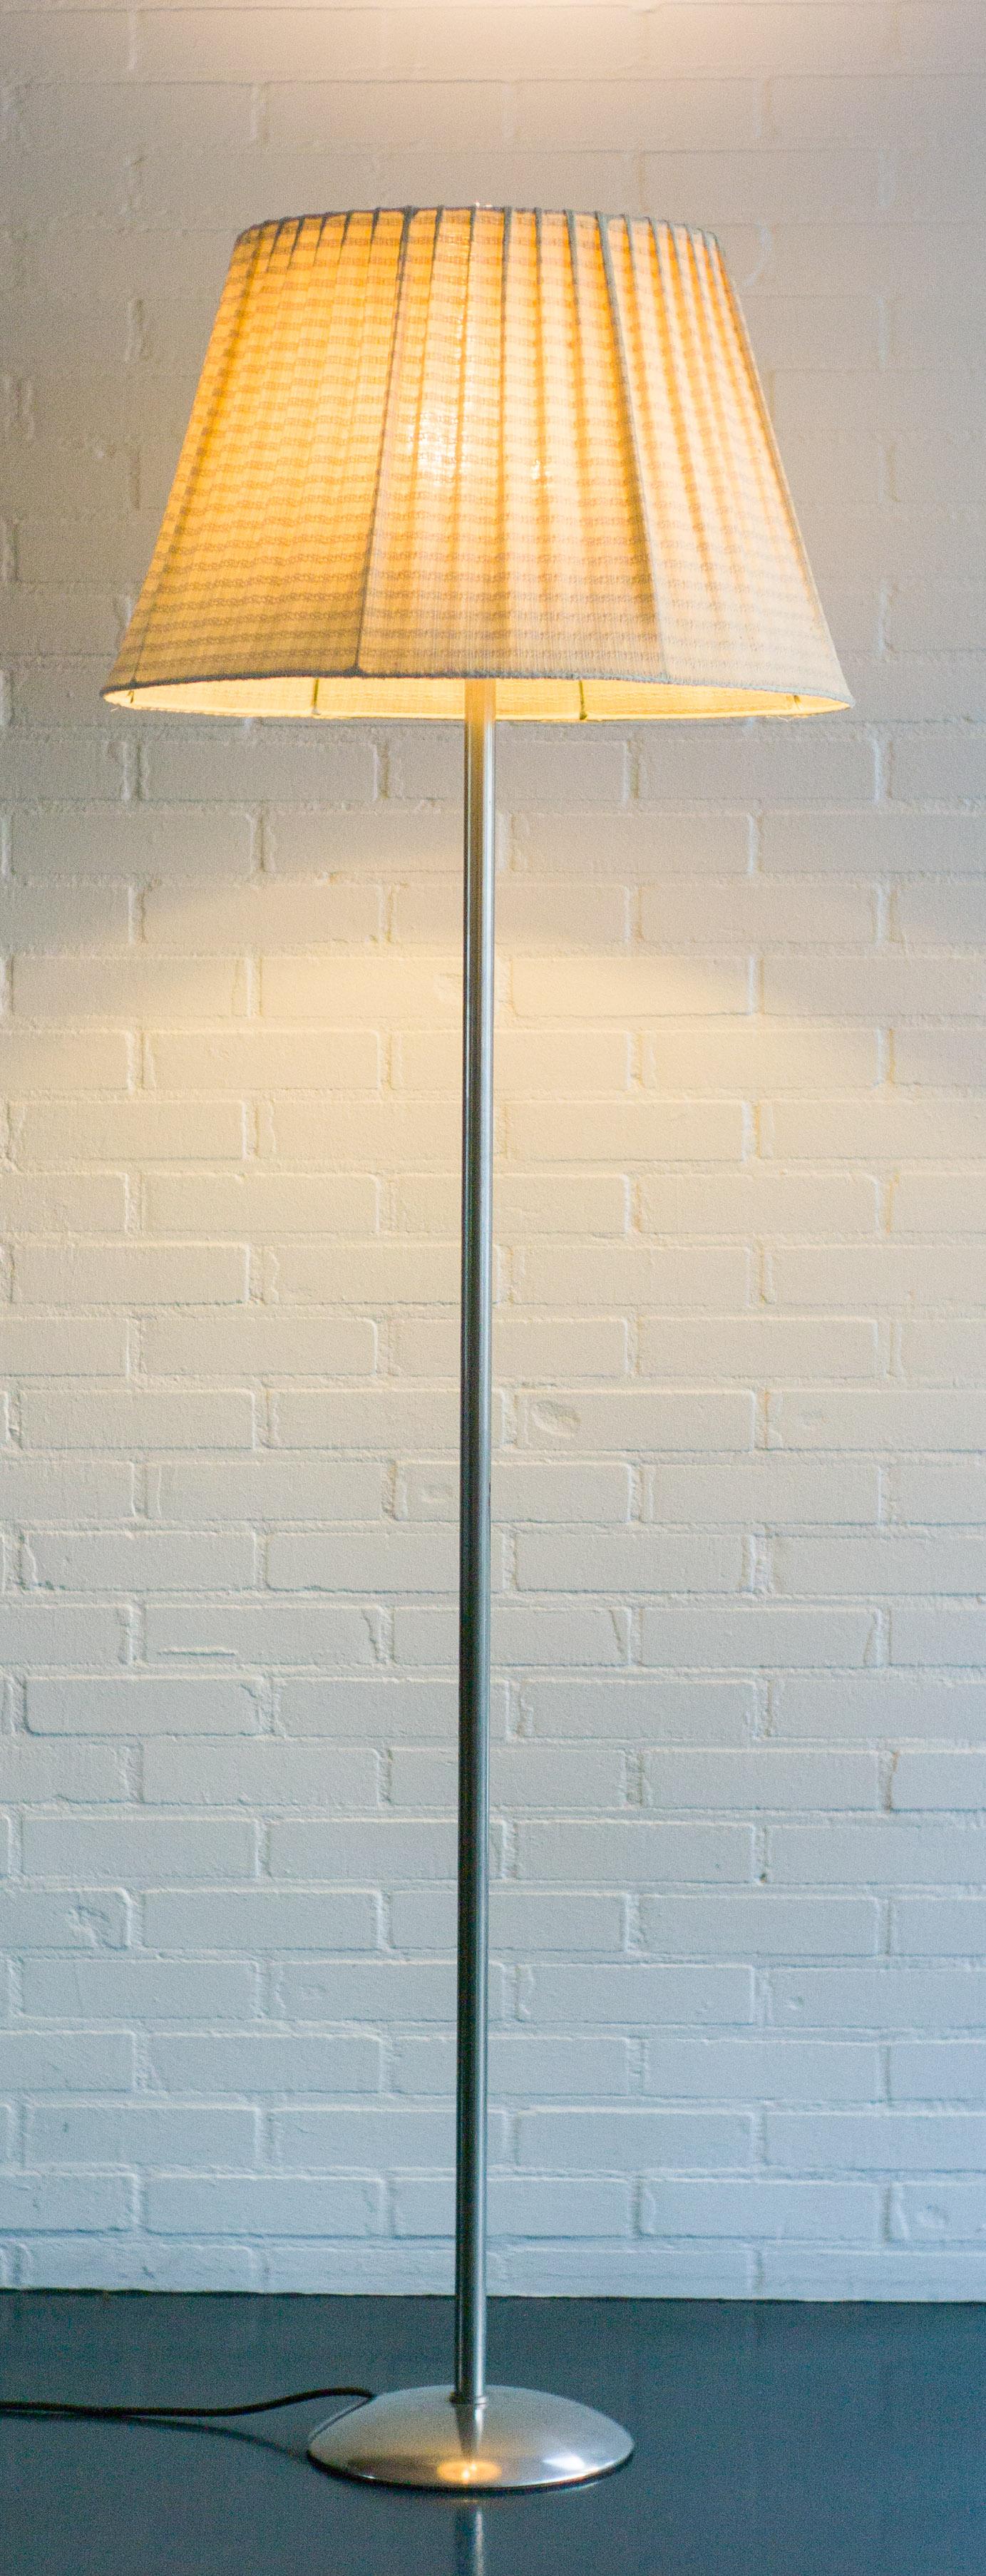 Modernist nickel-plated steel floor lamp with the original fabric shade.
The lamp has an uplighter and two lamps shining down.
Both the uplighter and the two down lights have a separate switch.
Great all original condition.
  